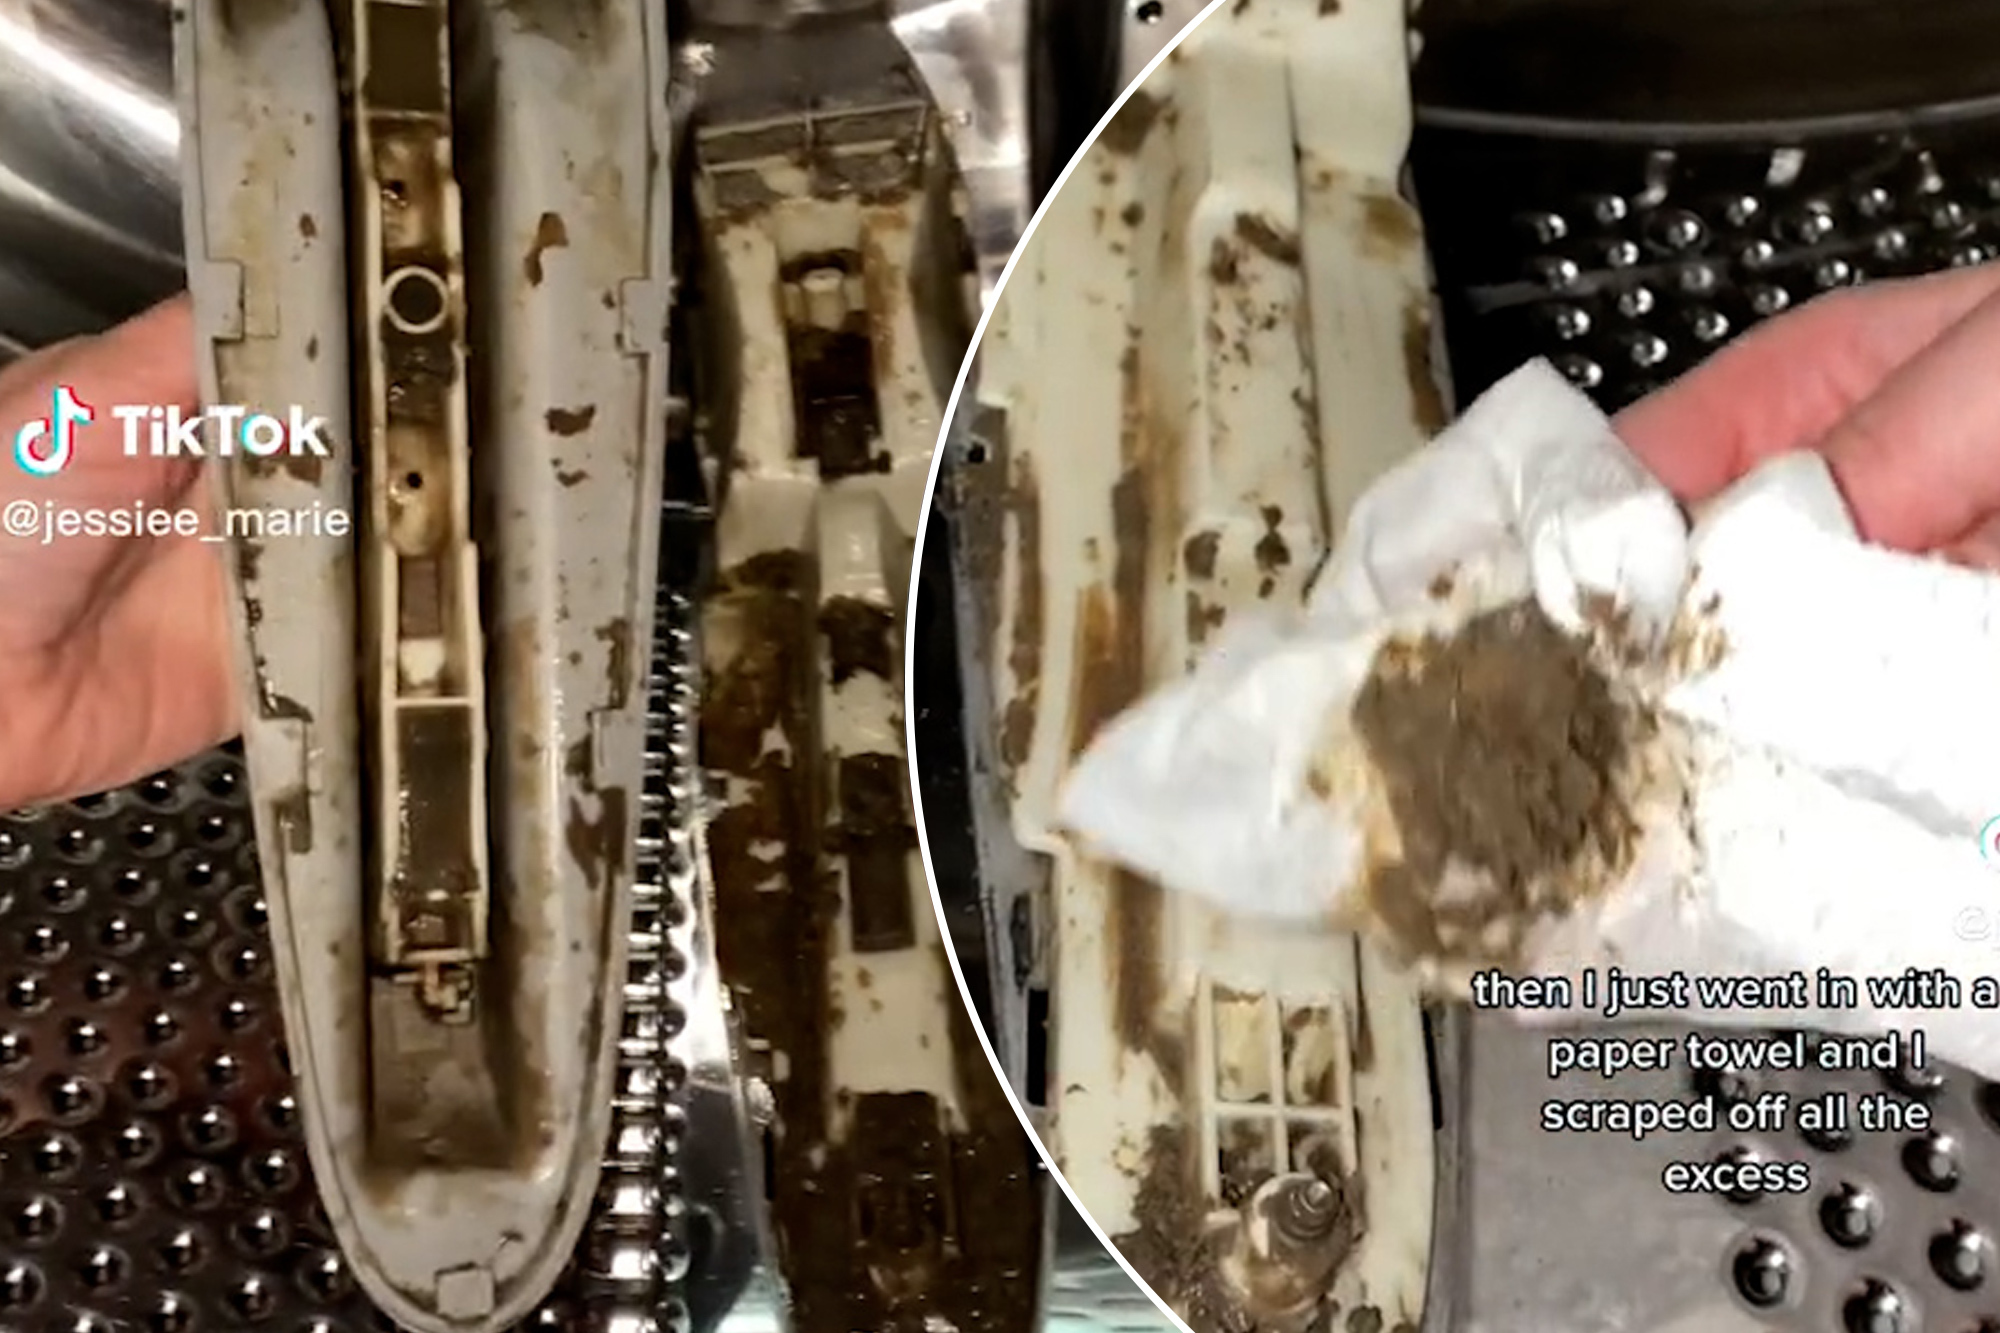 TikTok video discovers gross washing machine compartment full of grime